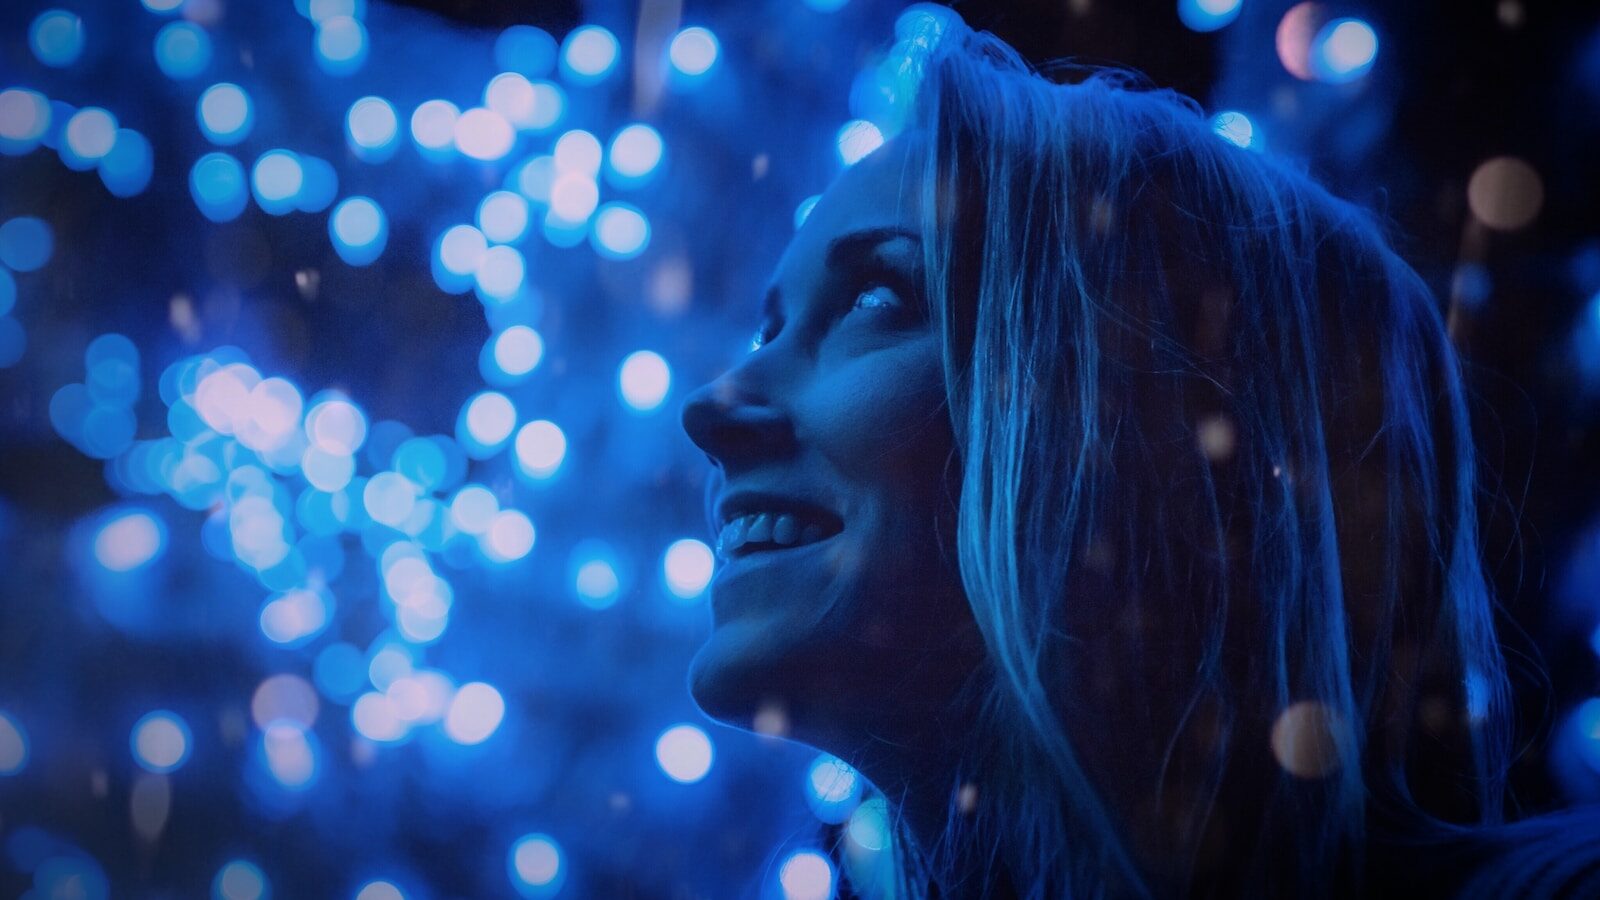 Decorative: AI is helping coach tech providers create personalized development pathways that adapt to client needs. Image description: woman looking at blue lights